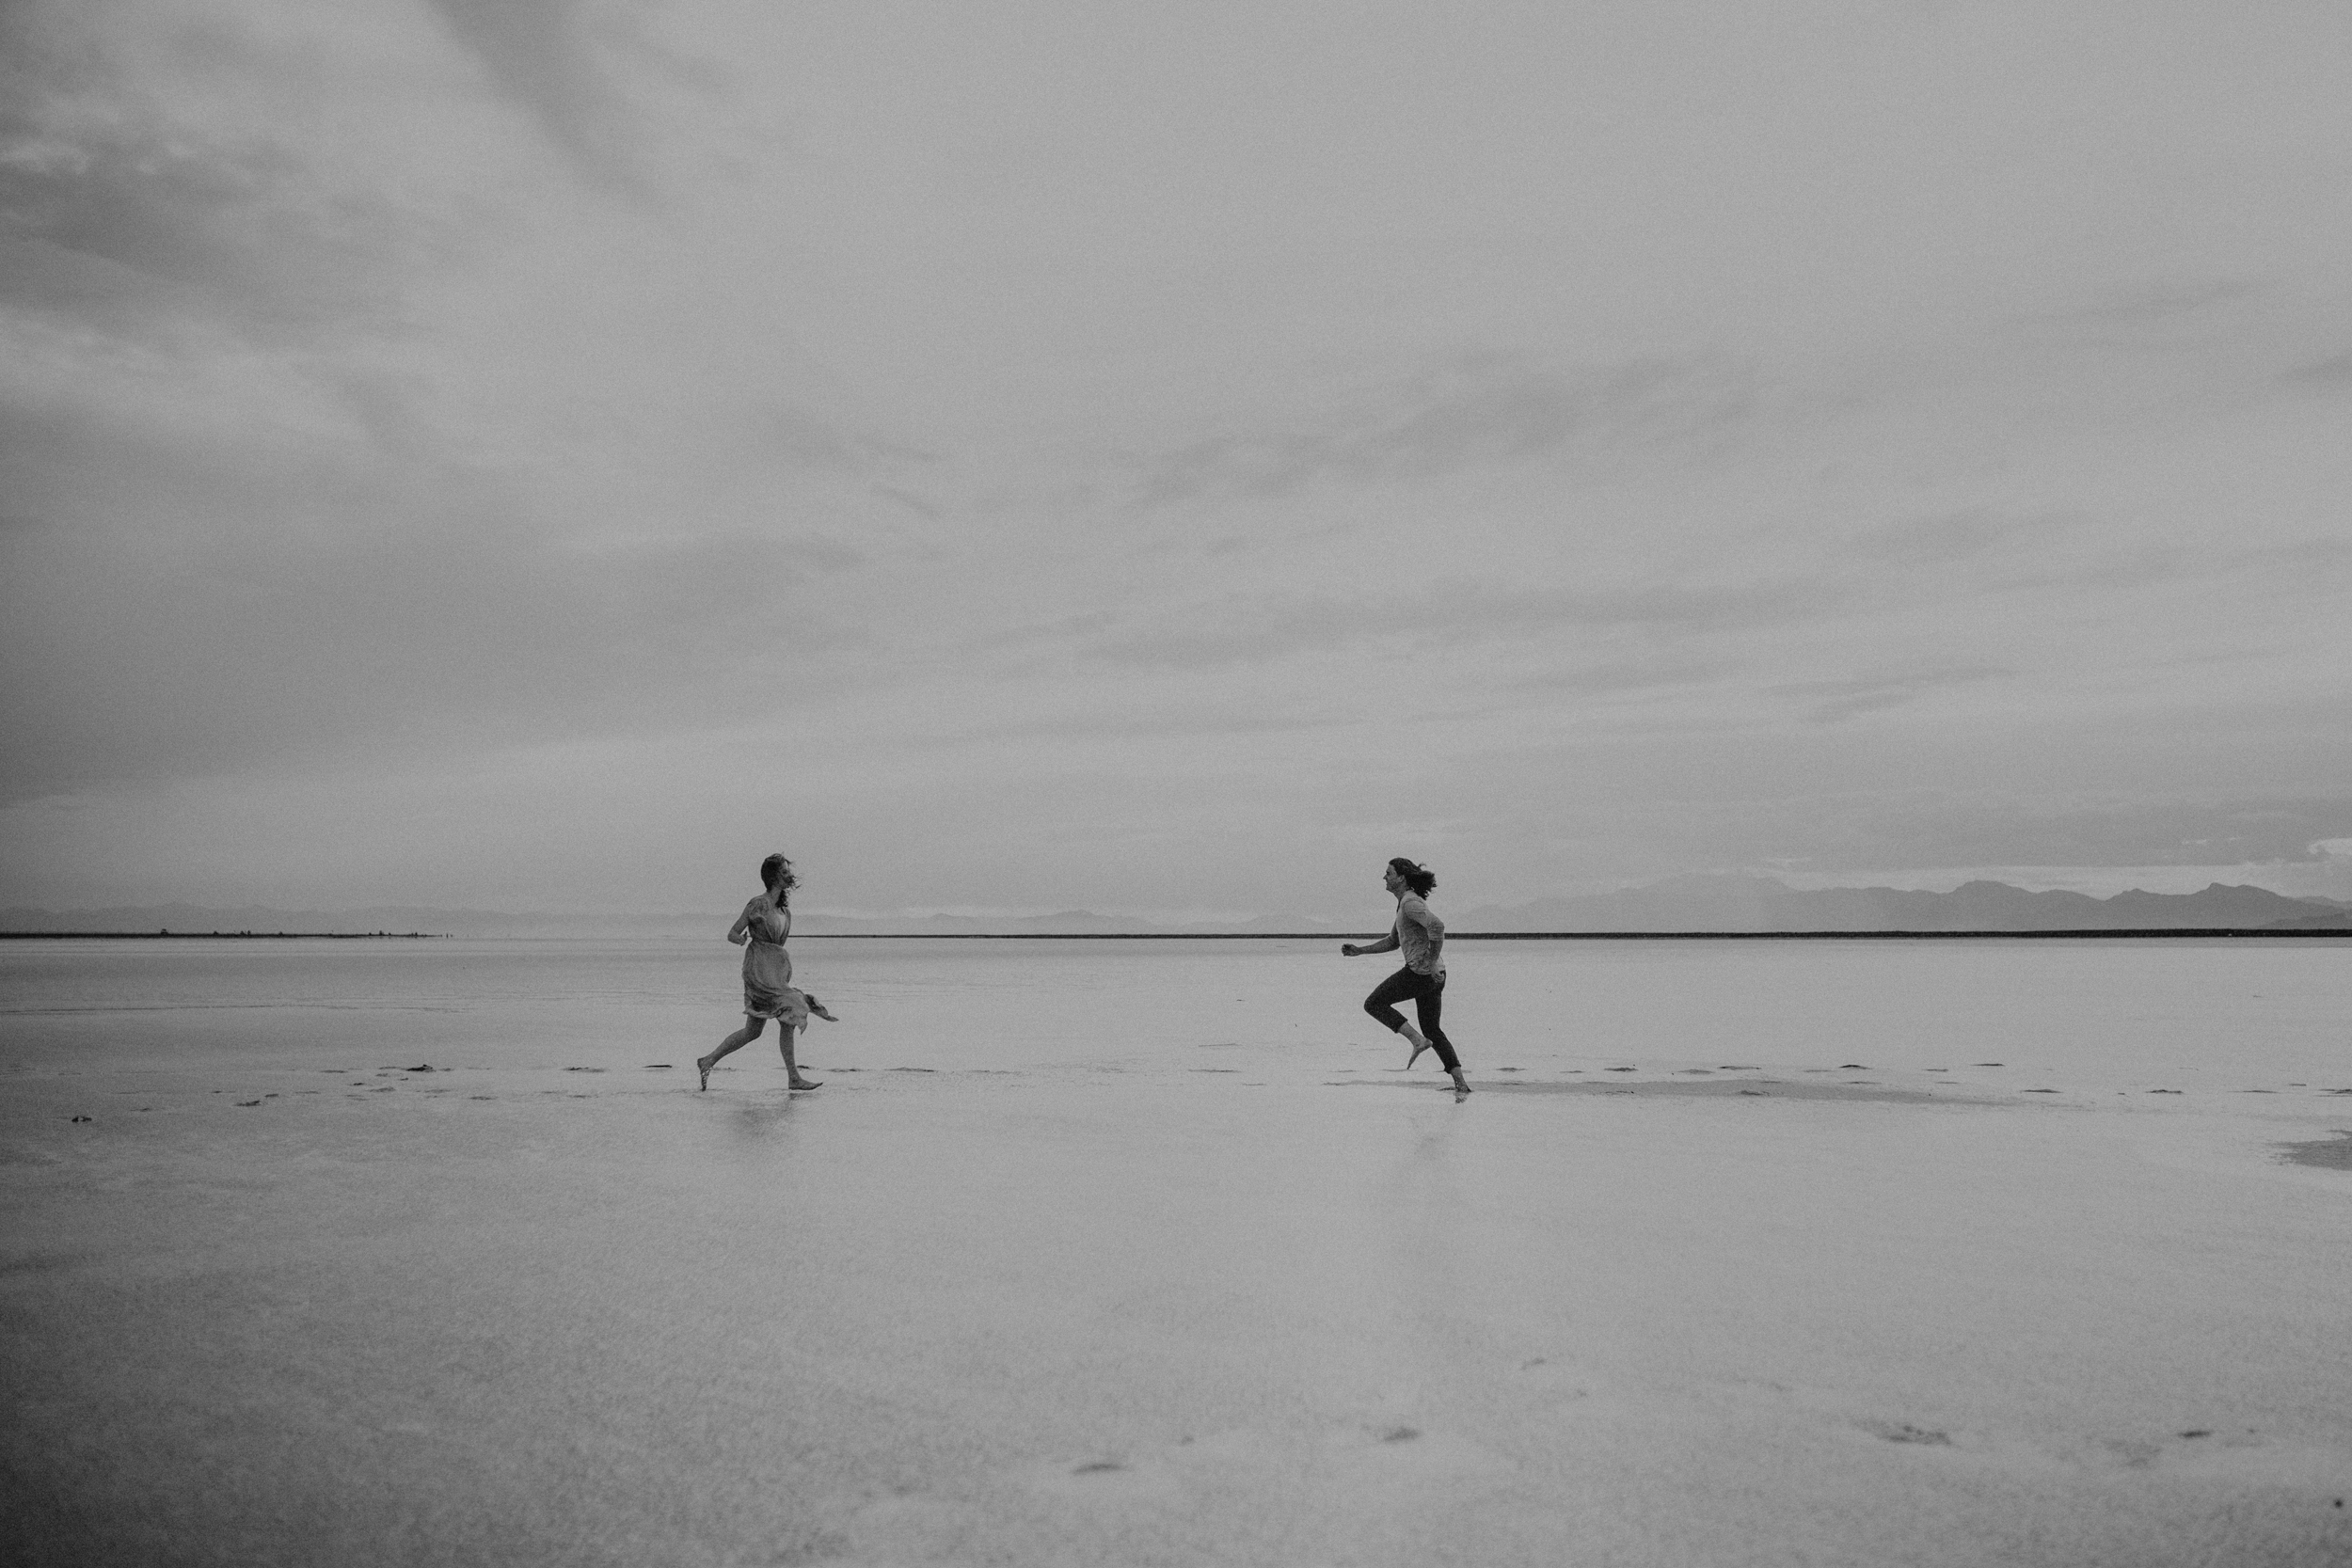 Couple running together on water and salt flats